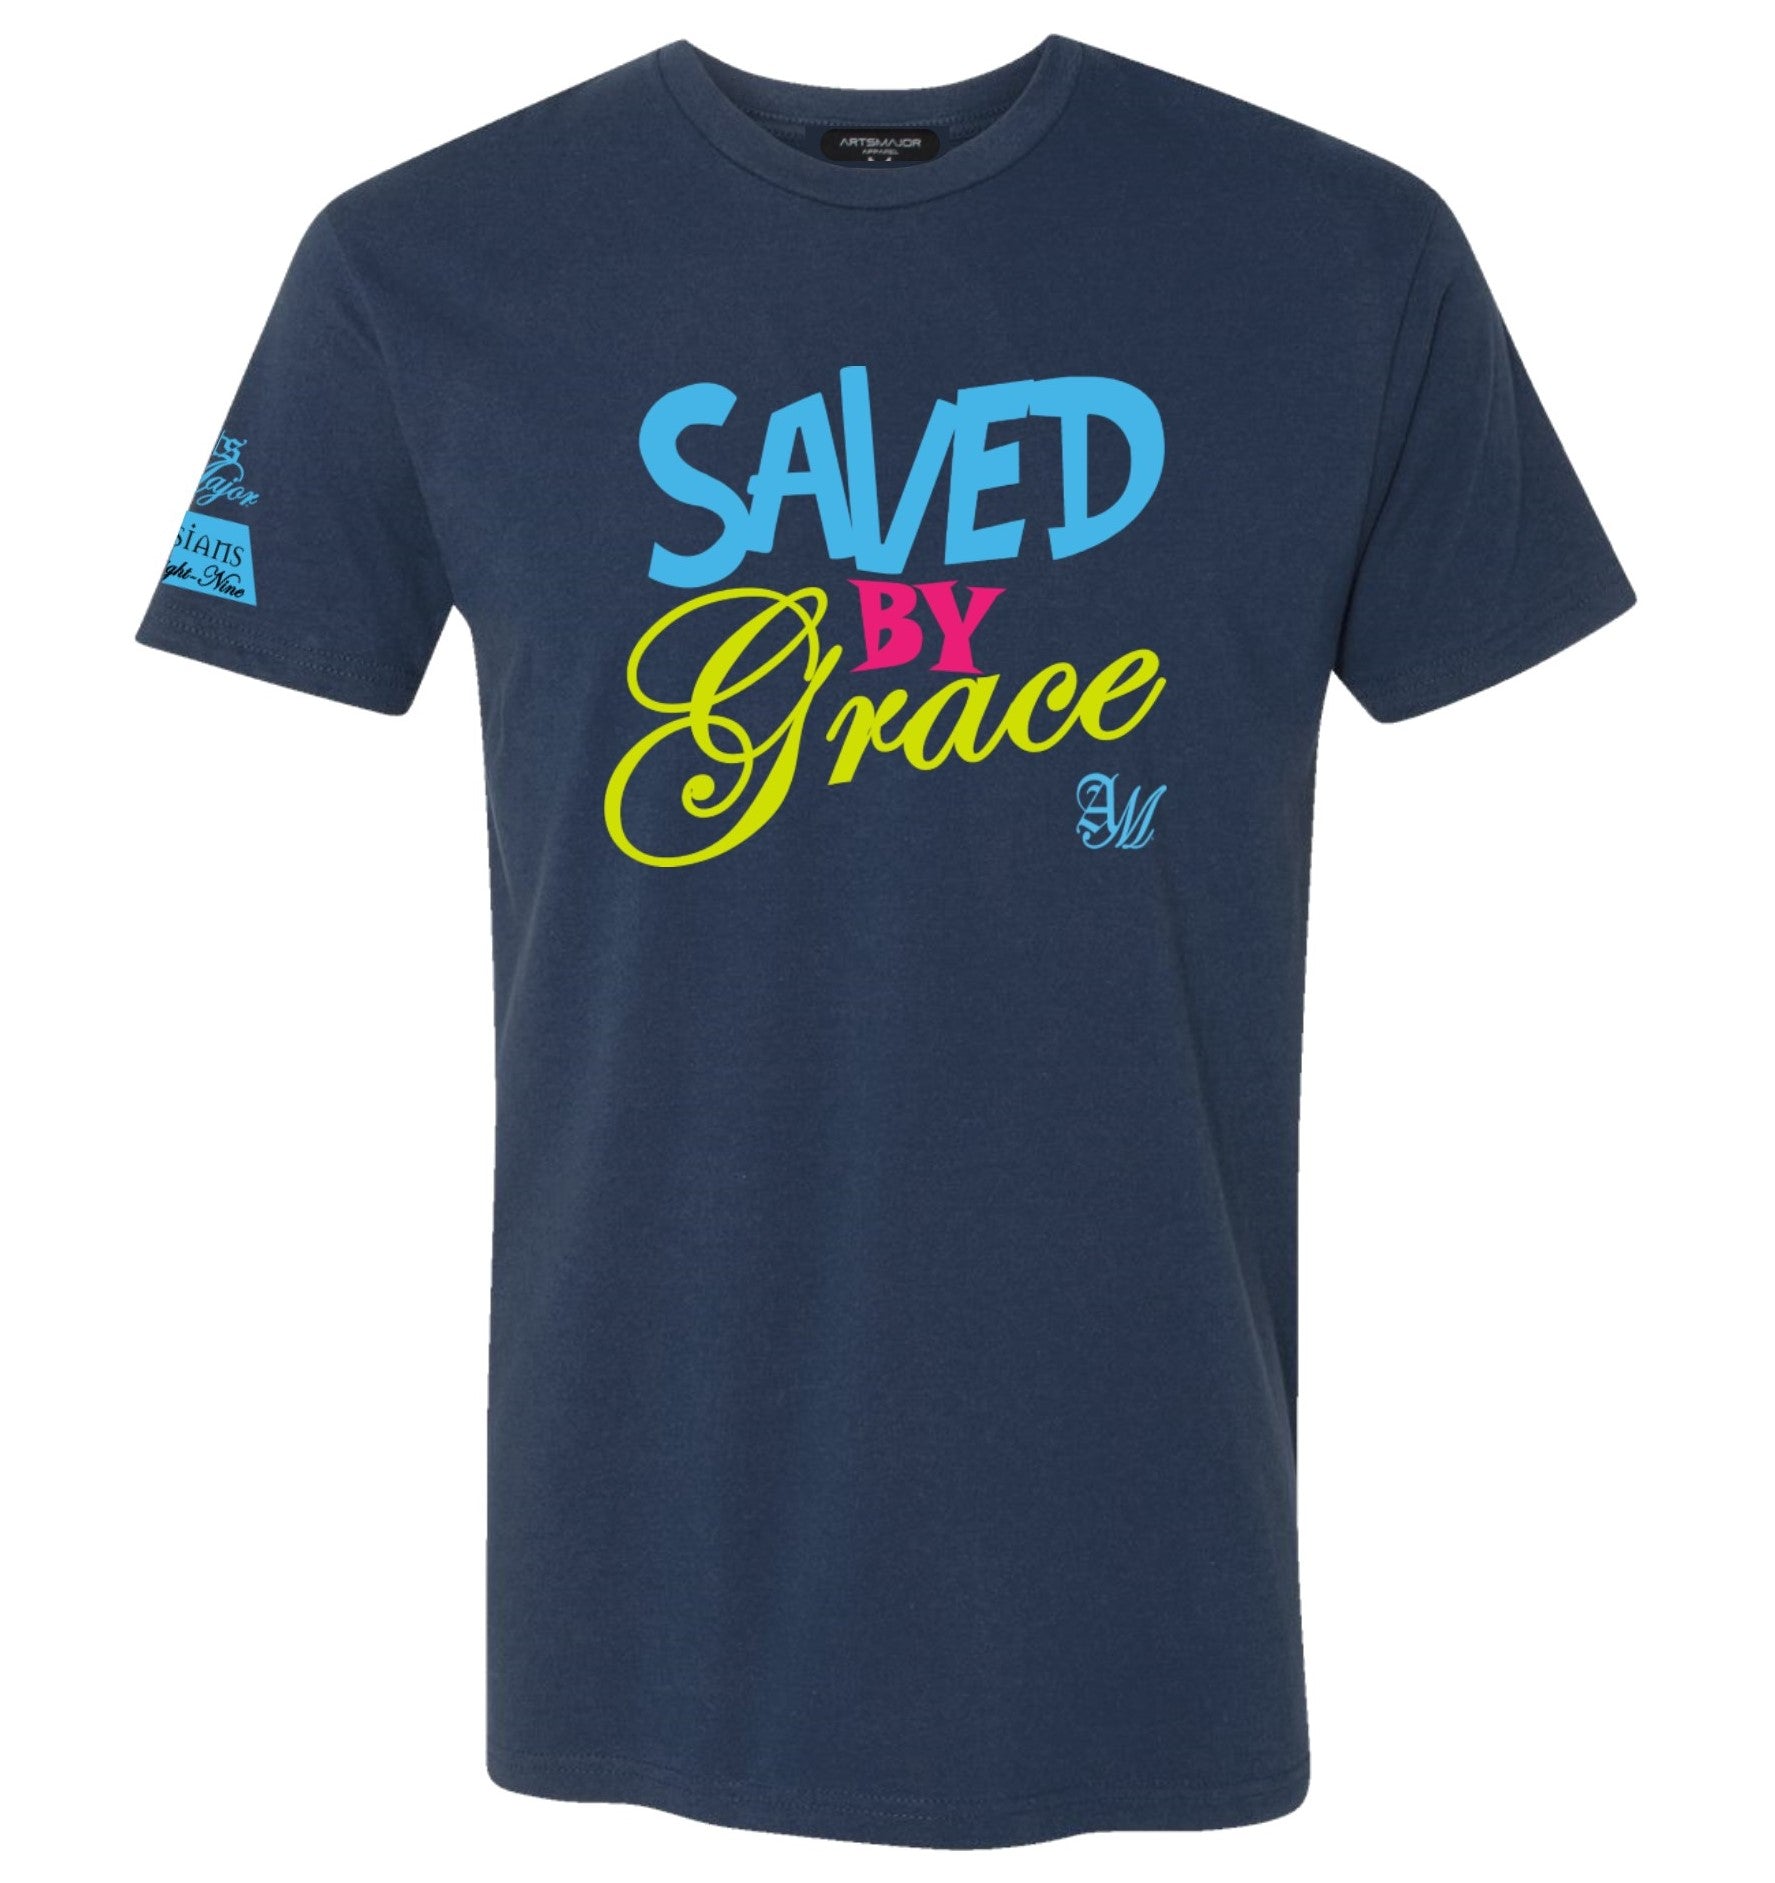 AM | "Saved By Grace" Short-Sleeve Unisex Tee